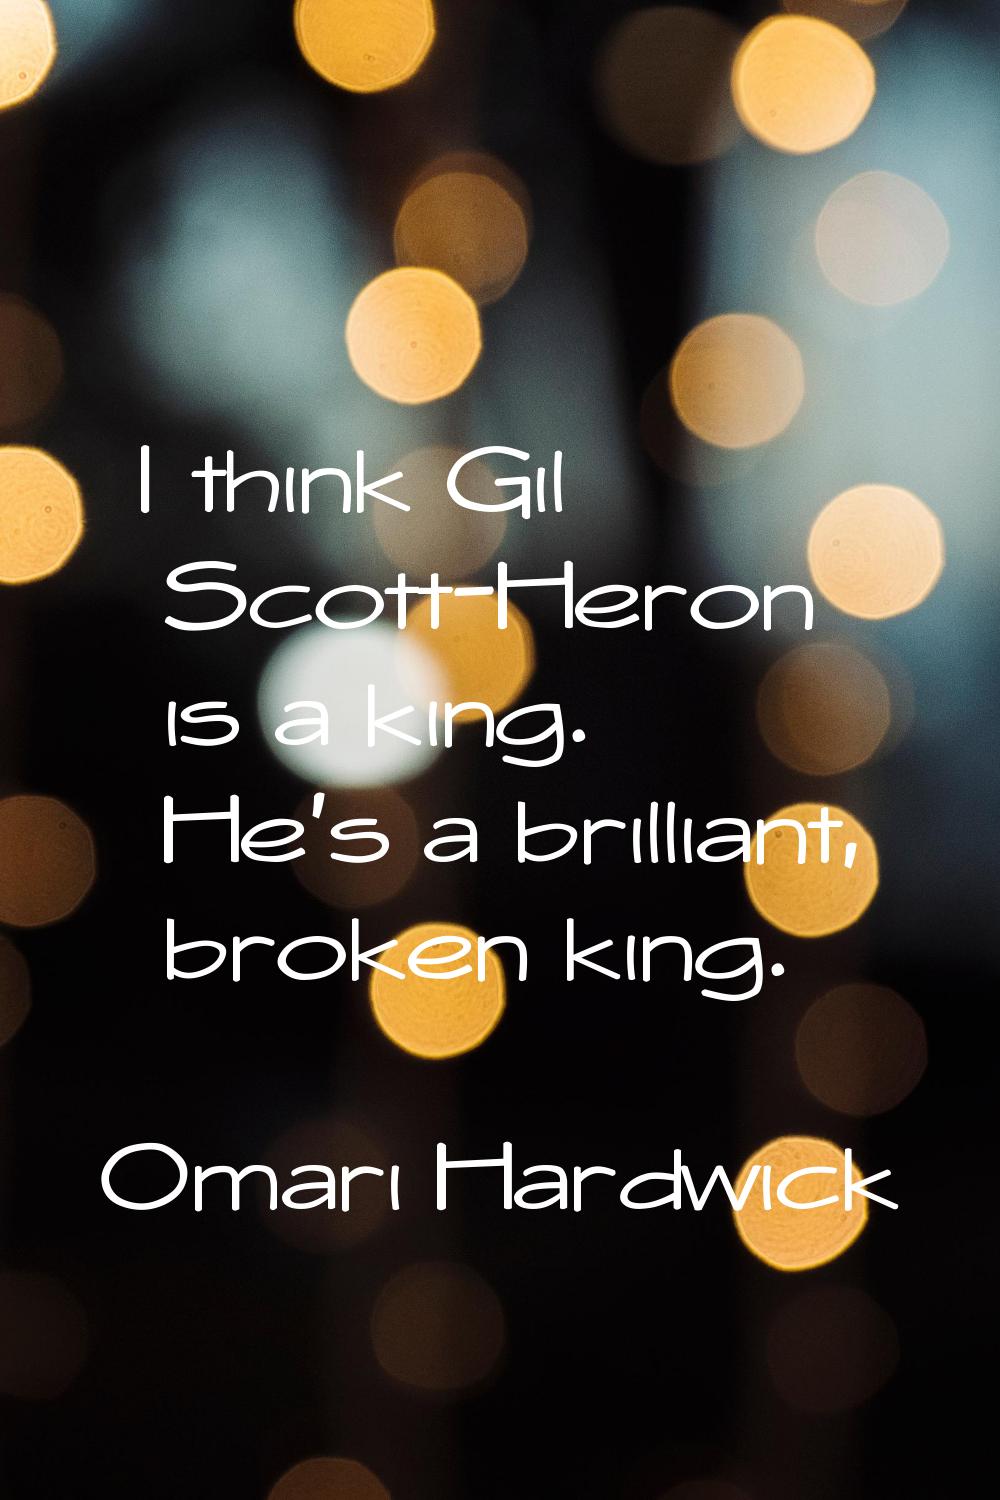 I think Gil Scott-Heron is a king. He's a brilliant, broken king.